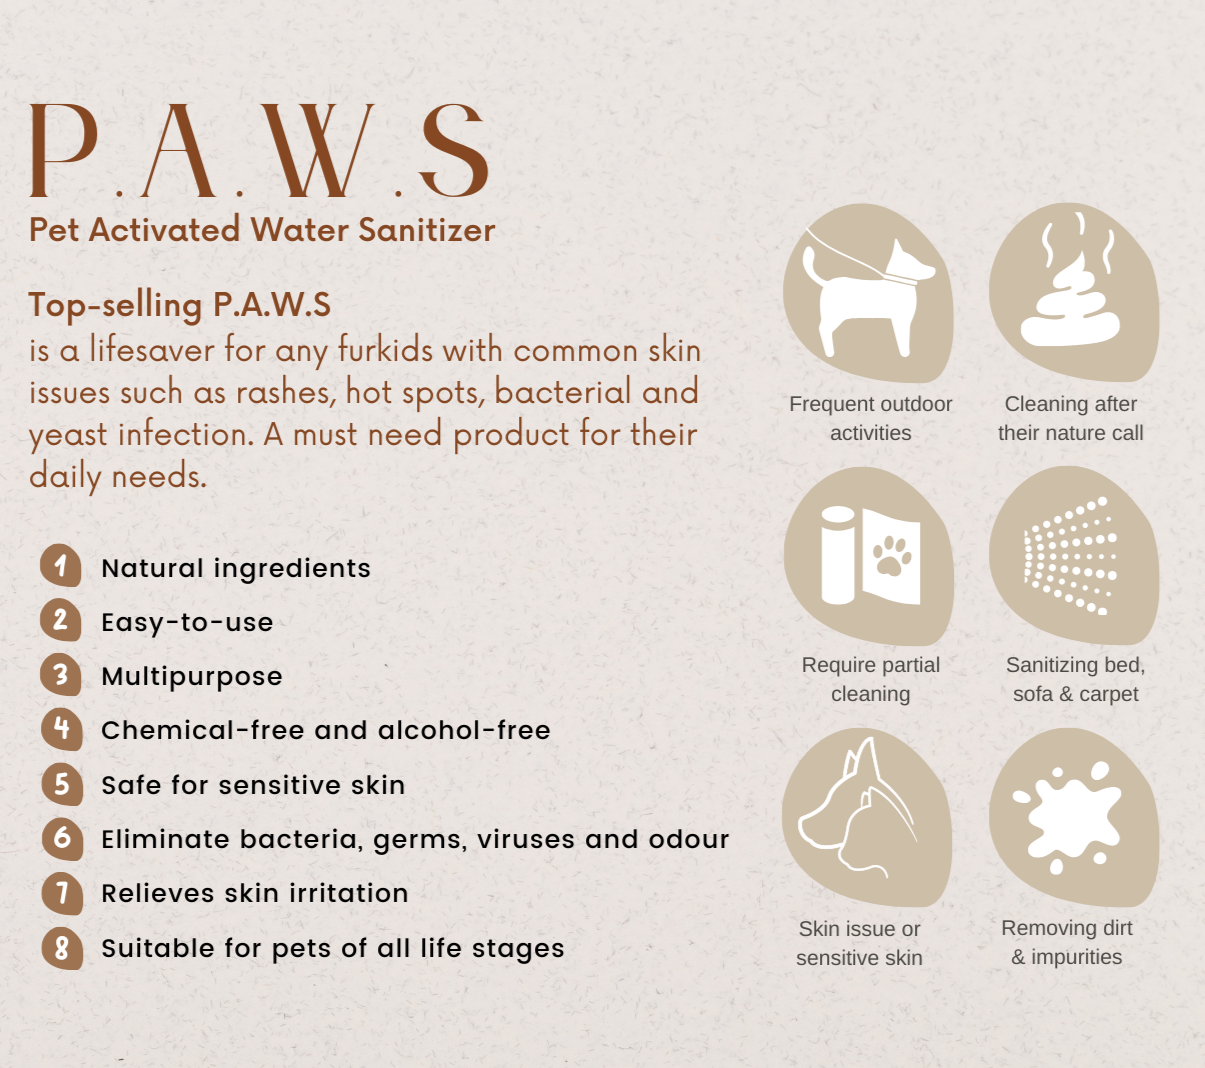 FOR FURRY FRIENDS Pet's Activated Water Sanitizer (P.A.W.S)